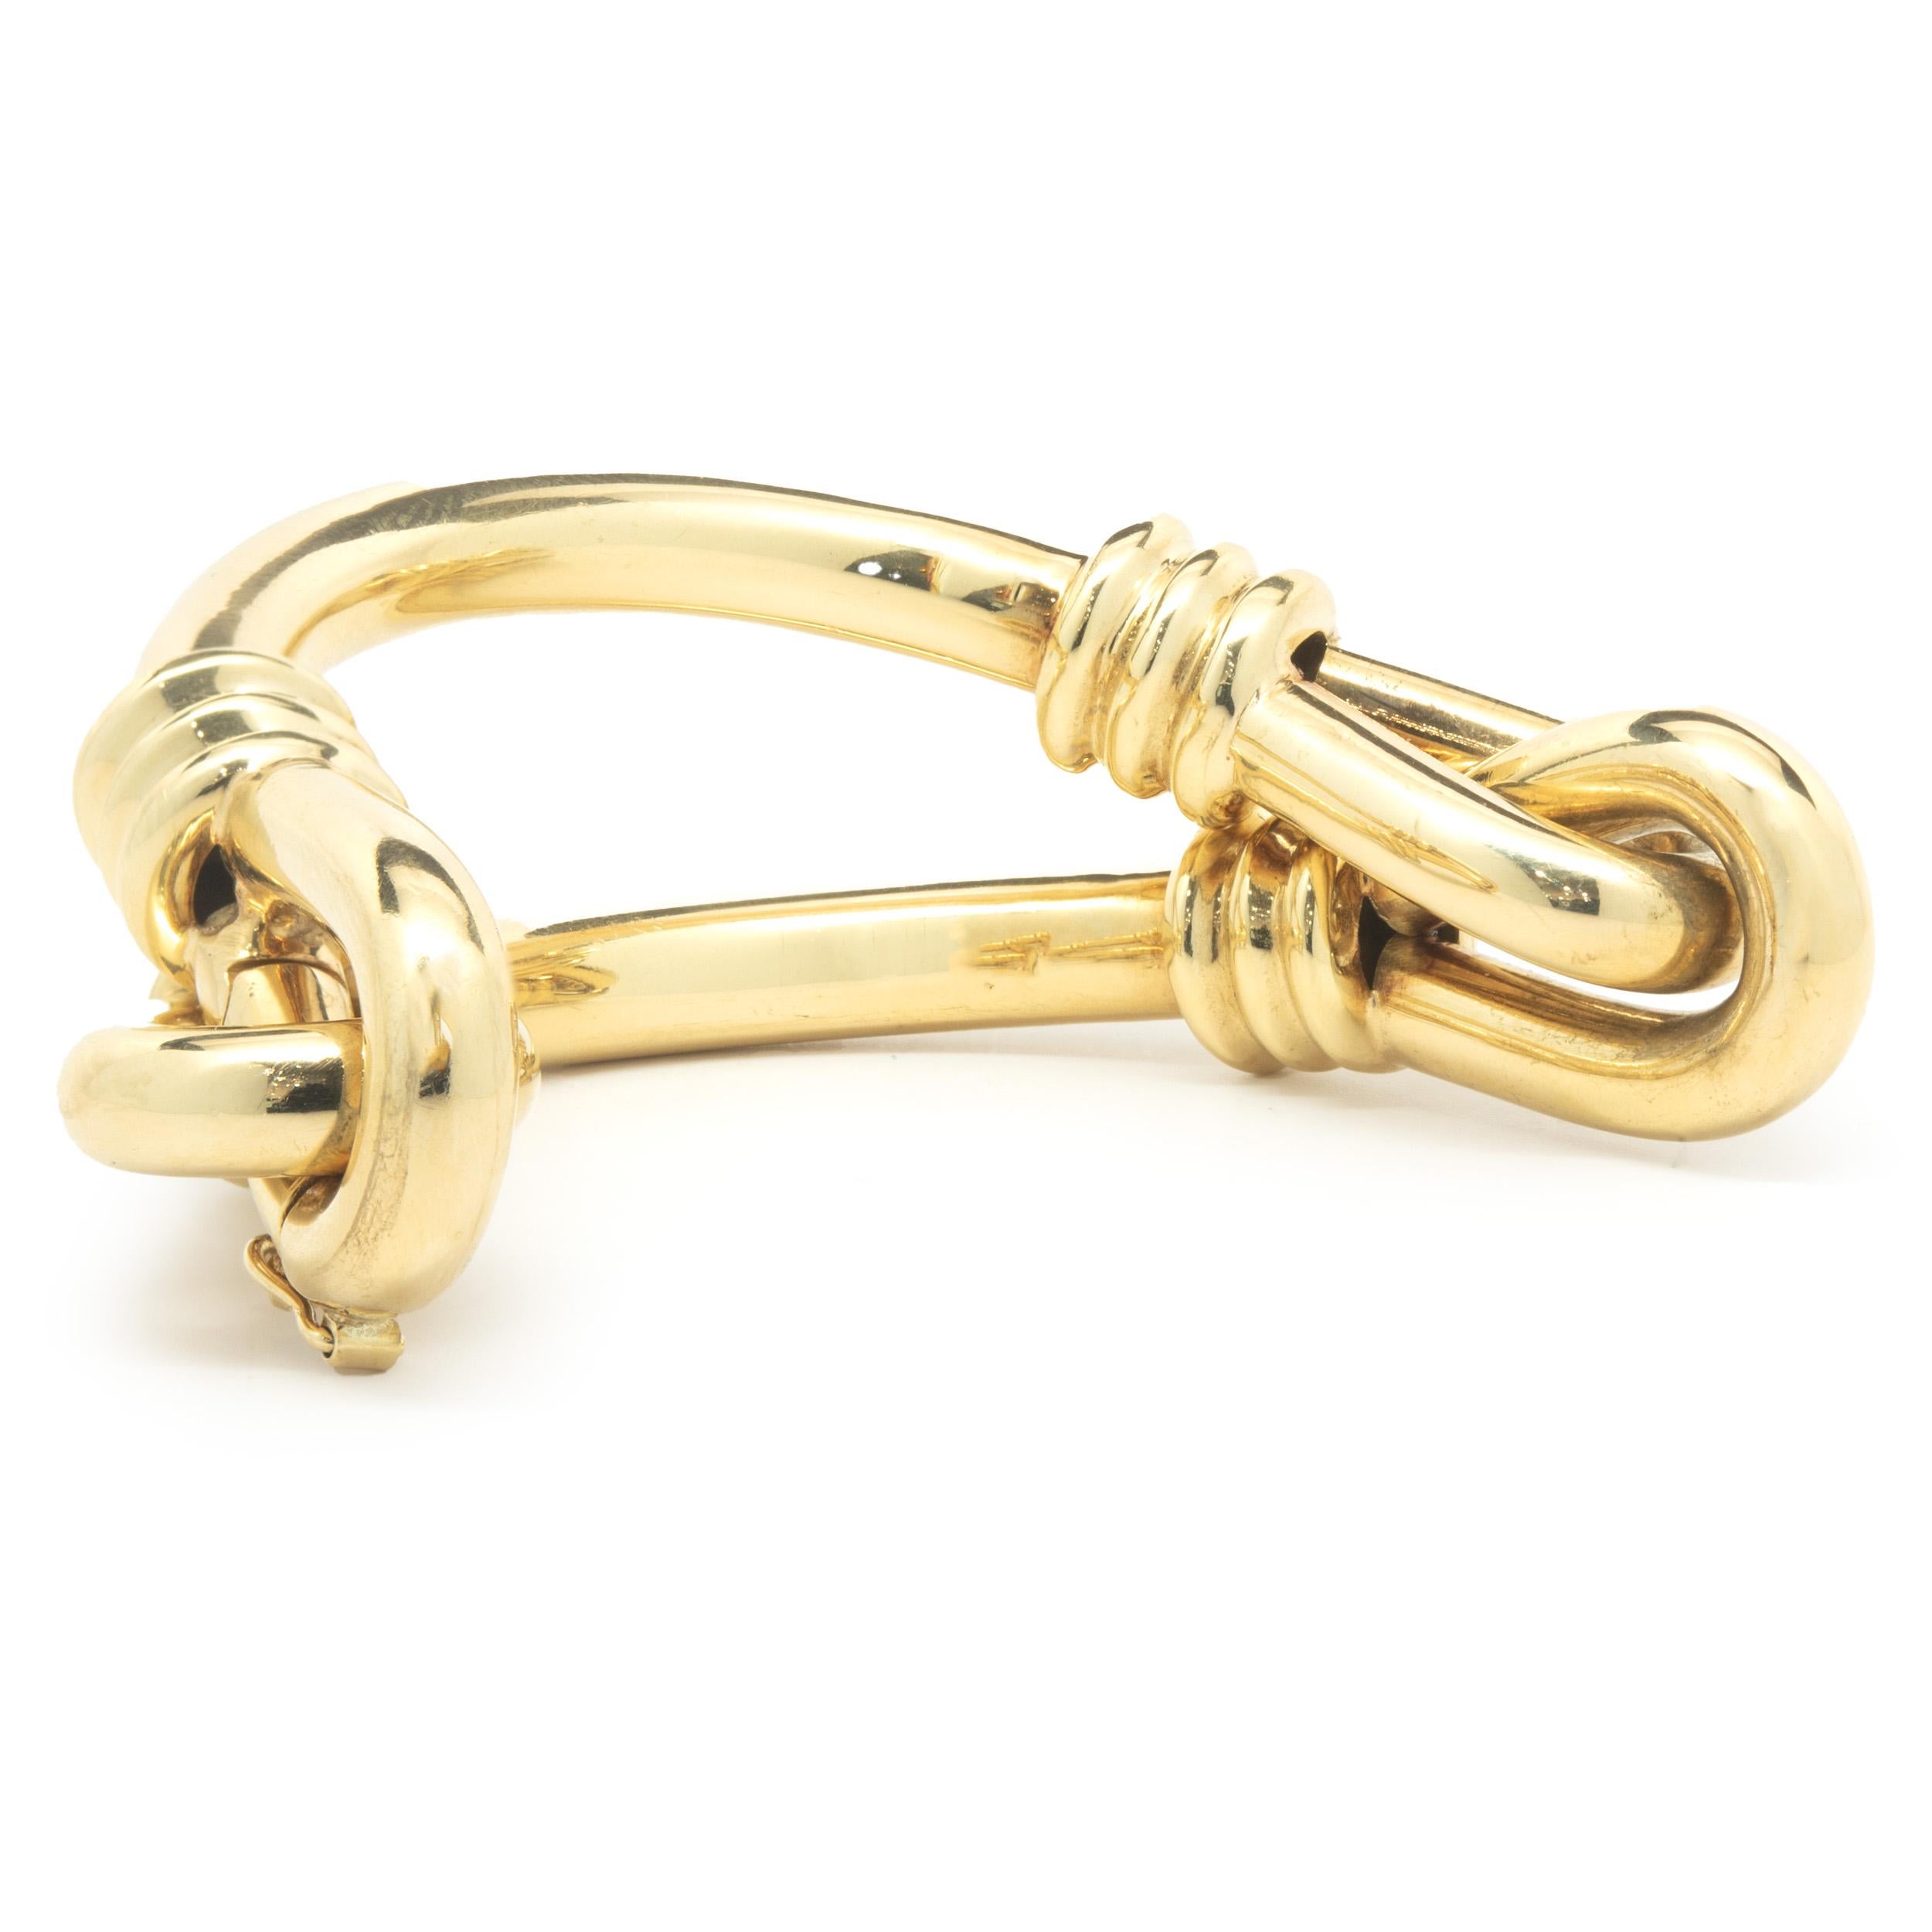 Material: 18K yellow gold
Dimension: bracelet will fit up to a 6.5-inch wrist 
Weight: 50.72 grams